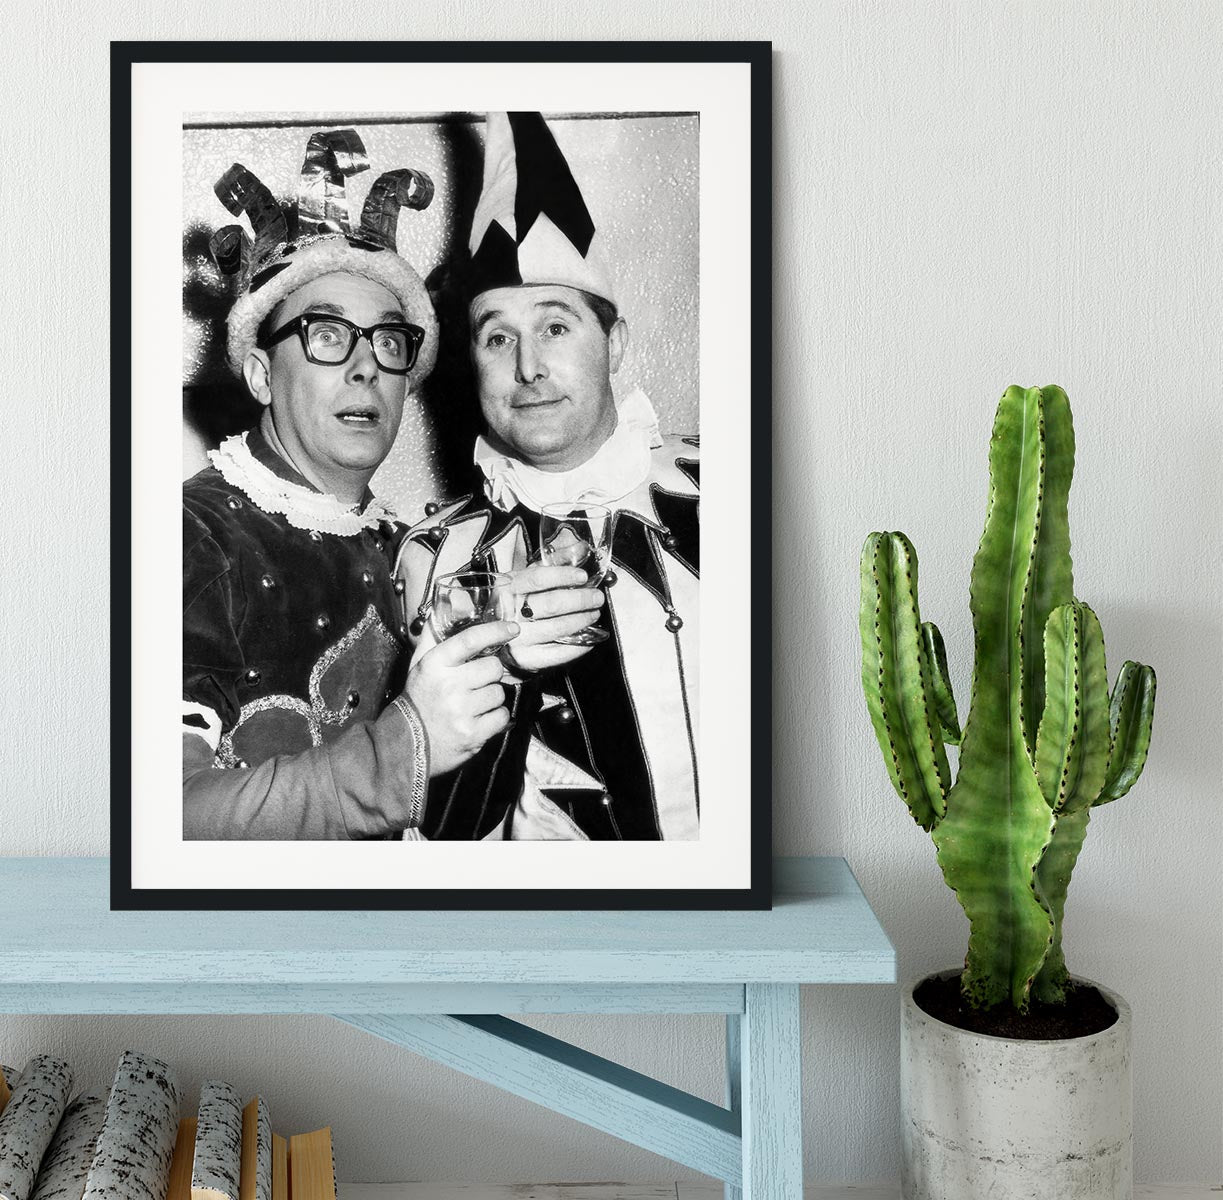 Morecambe and Wise dressed as court jesters Framed Print - Canvas Art Rocks - 1